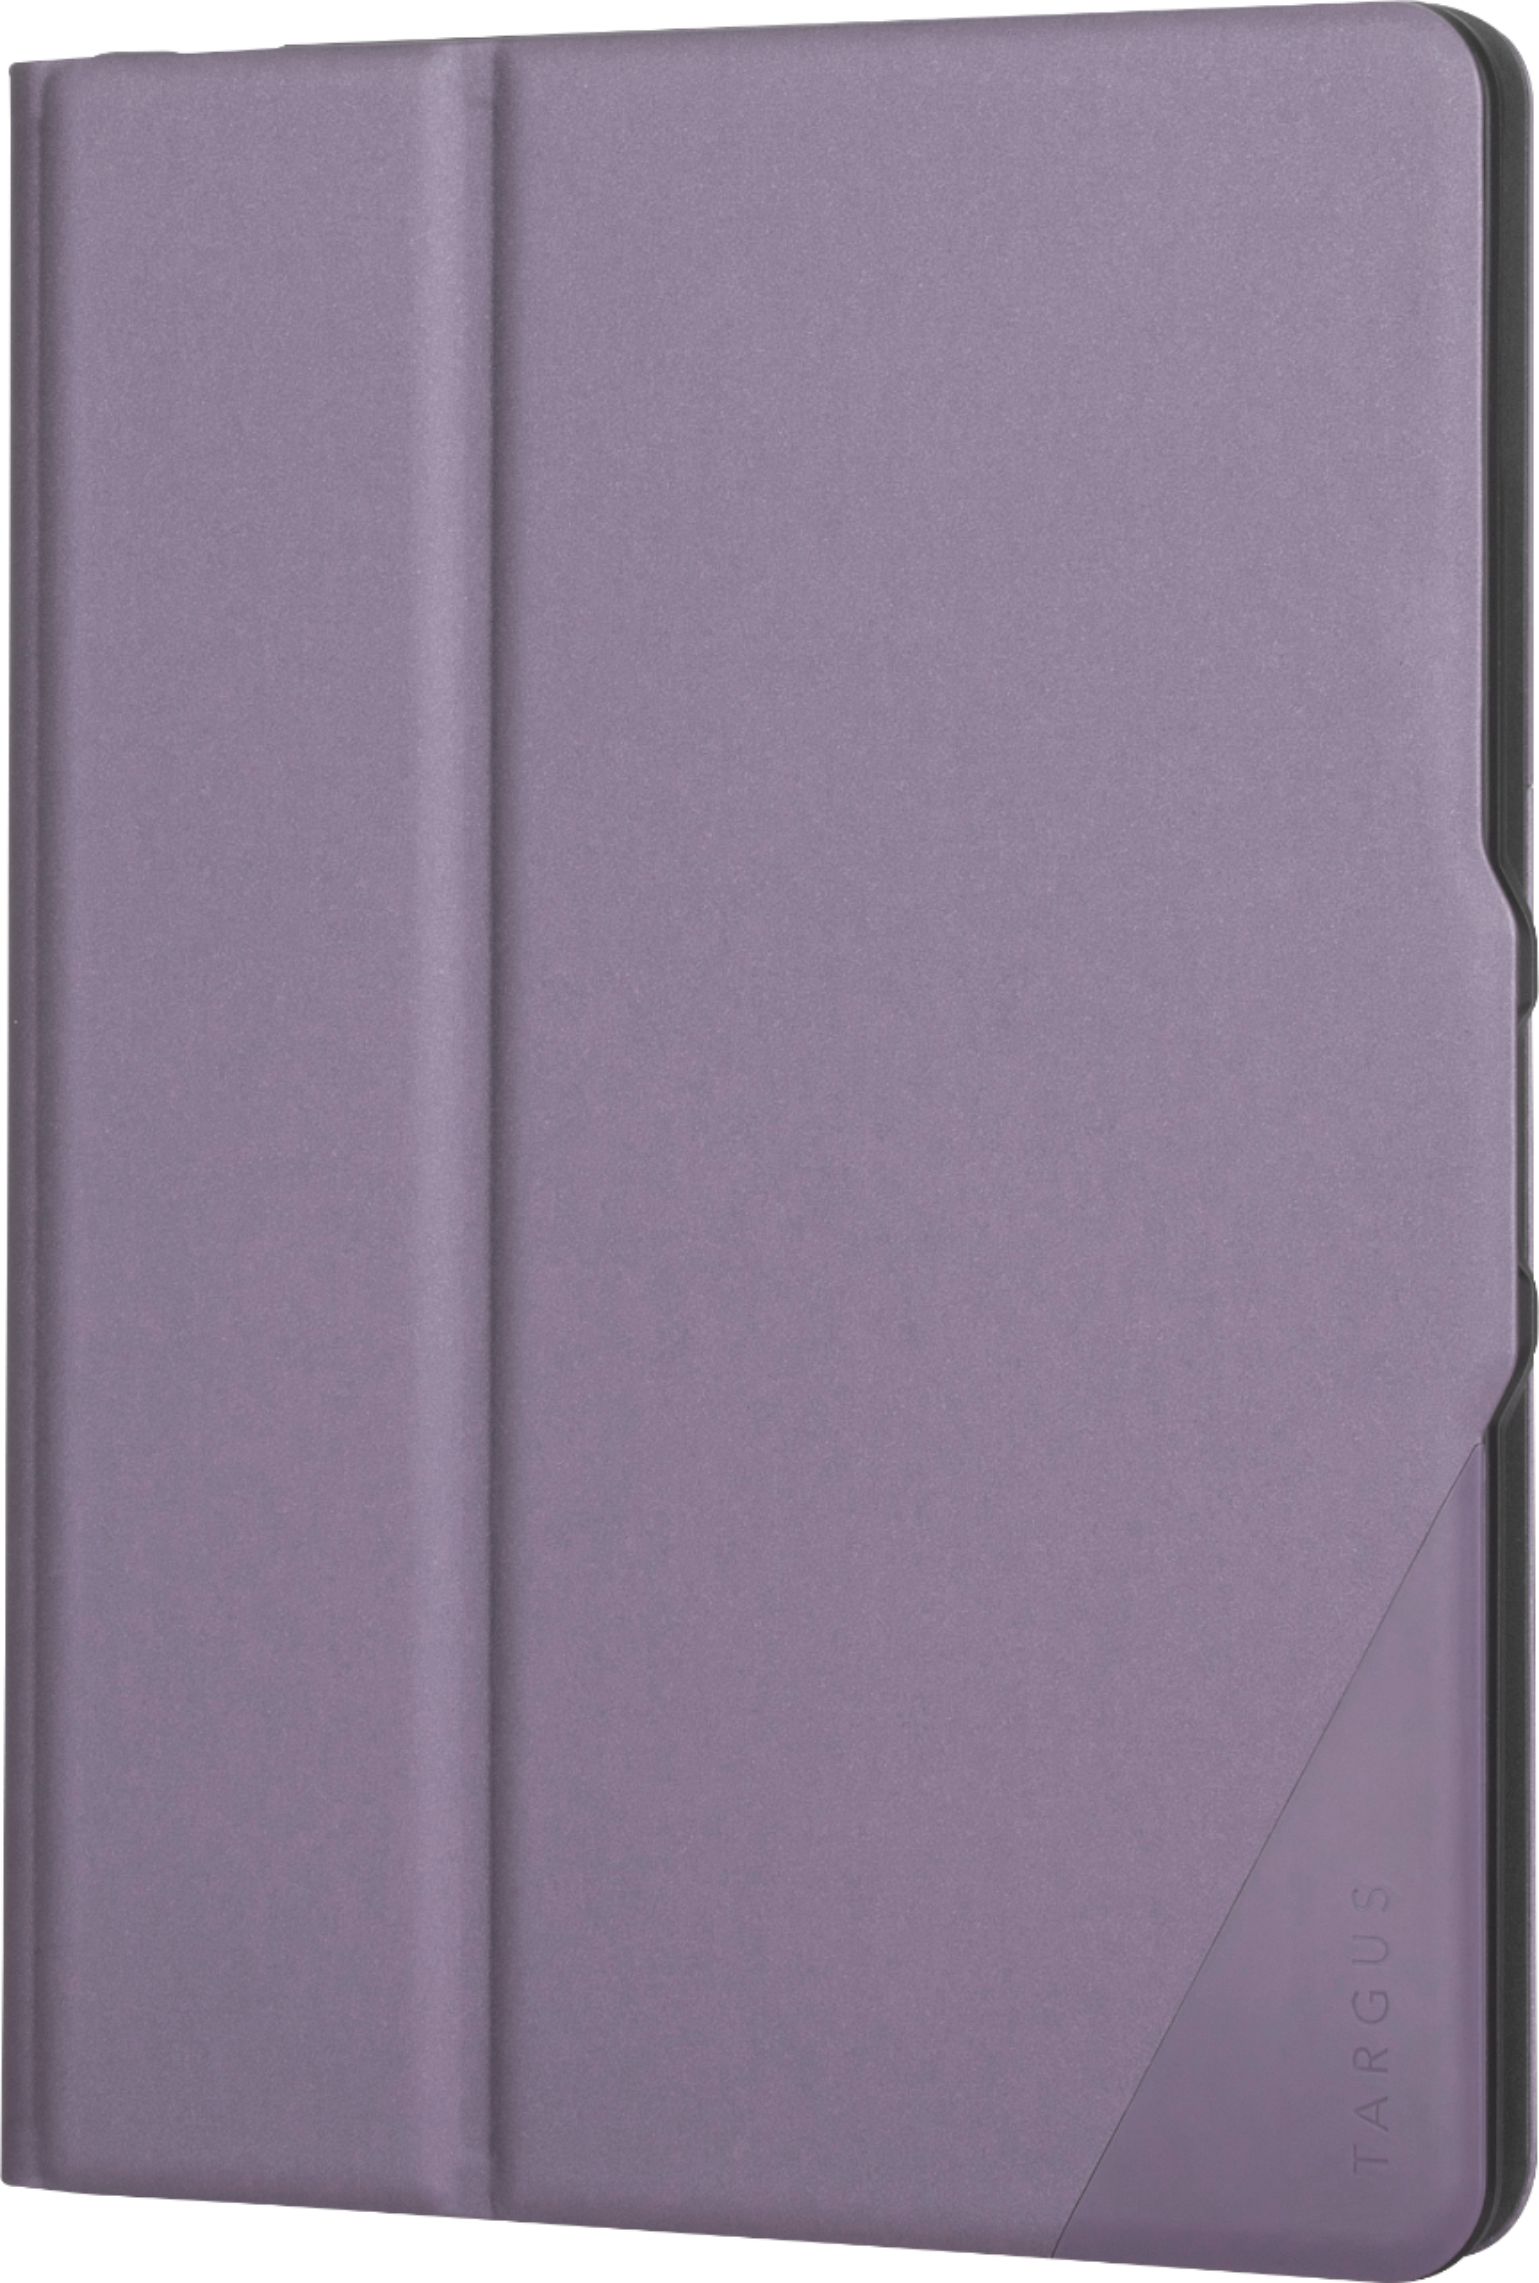 Angle View: Targus - VersaVu Case for iPad (9th/8th/7th gen.) 10.2-inch, iPad Air/Pro 10.5-inch - Violet